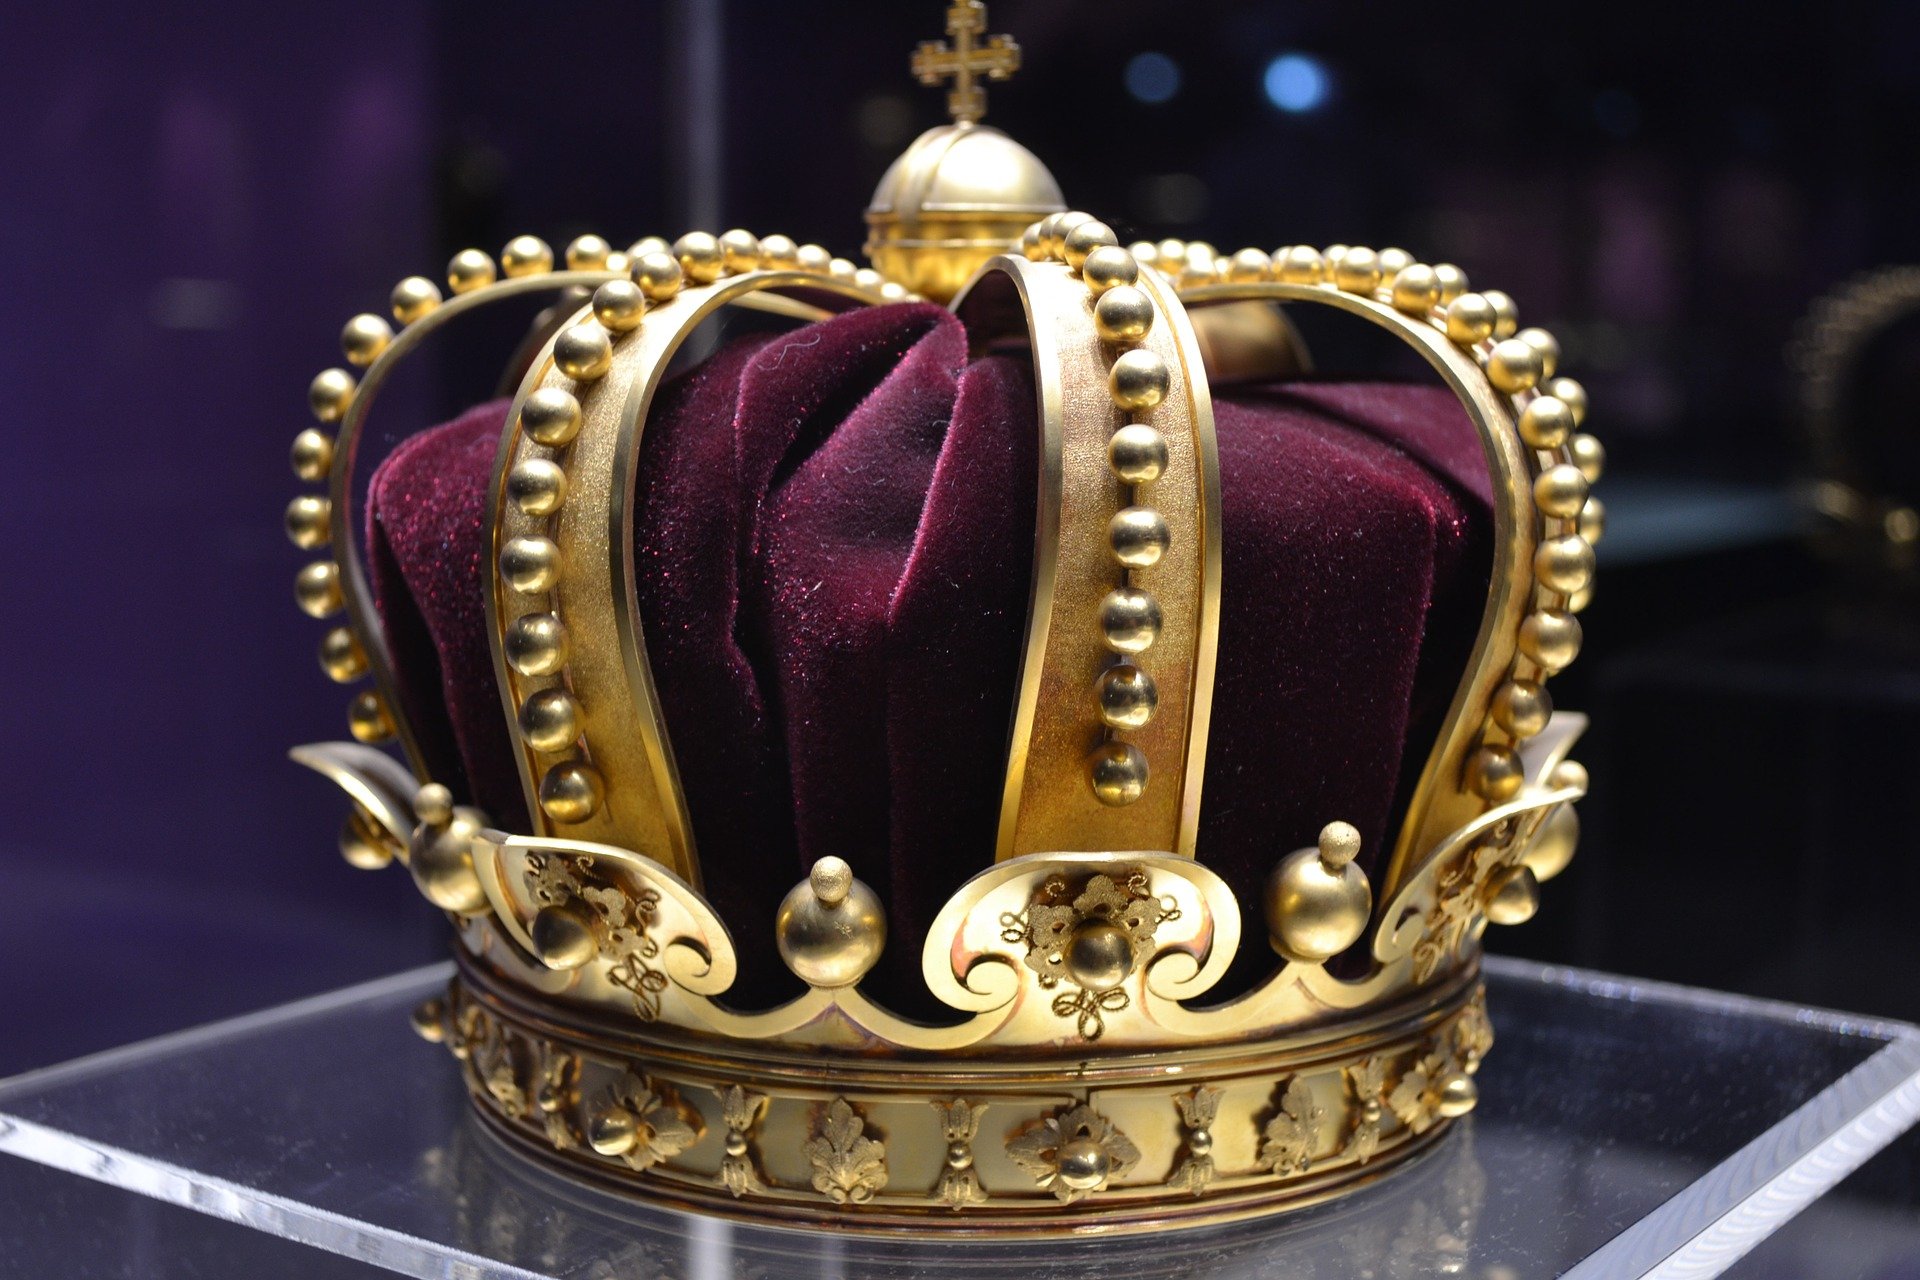 Pictured - The crown of a Romanian King | Source: Pixabay 